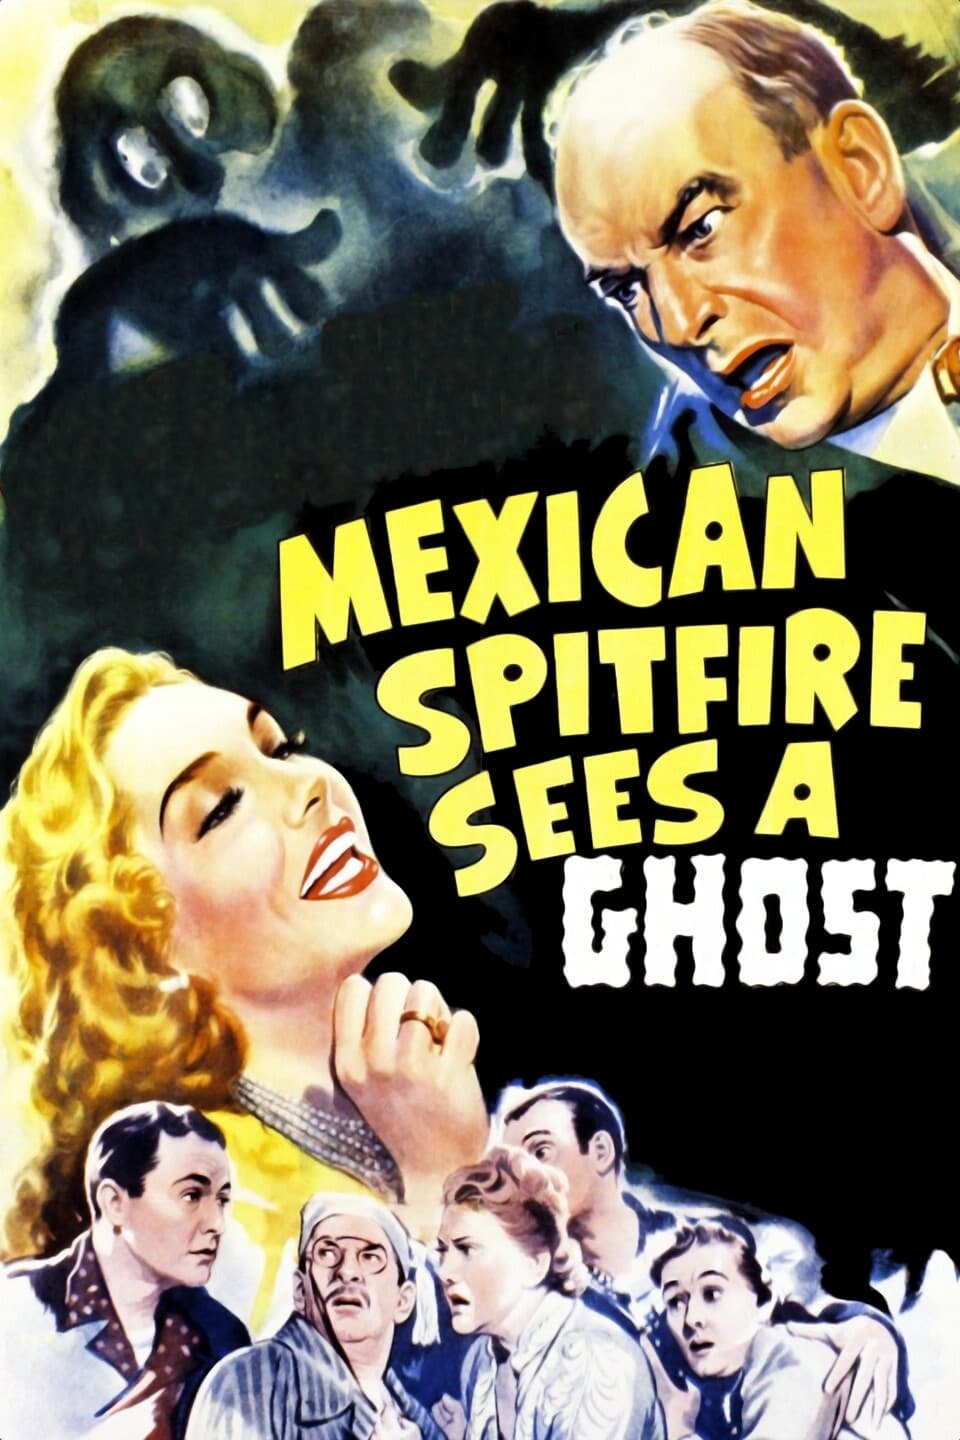 Mexican Spitfire Sees a Ghost